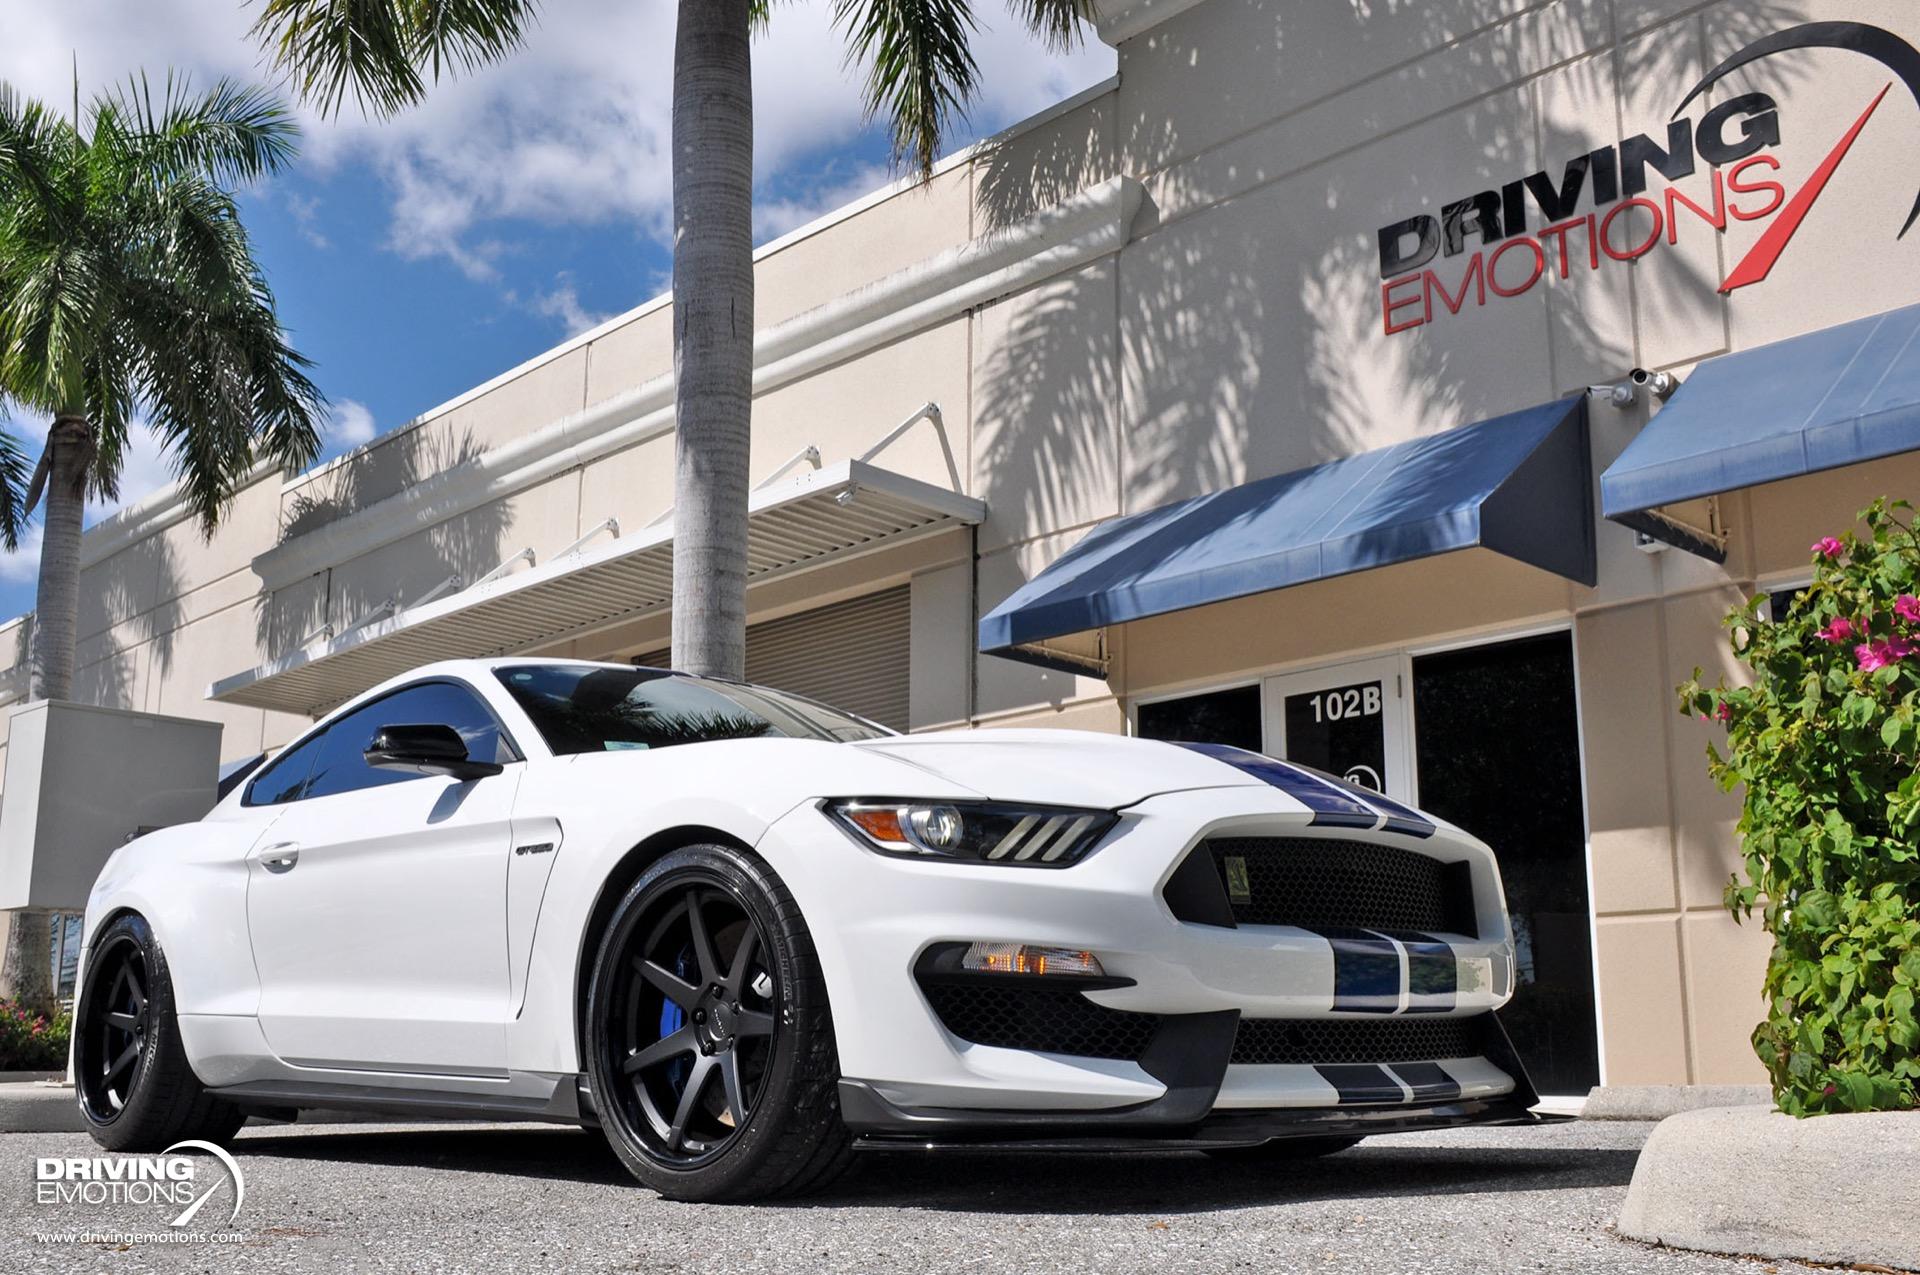 Used 2017 Ford Mustang Shelby GT350 ELECTRONICS PACKAGE! CUSTOM WIDE BODY! CUSTOM UPGRADES! | Lake Park, FL